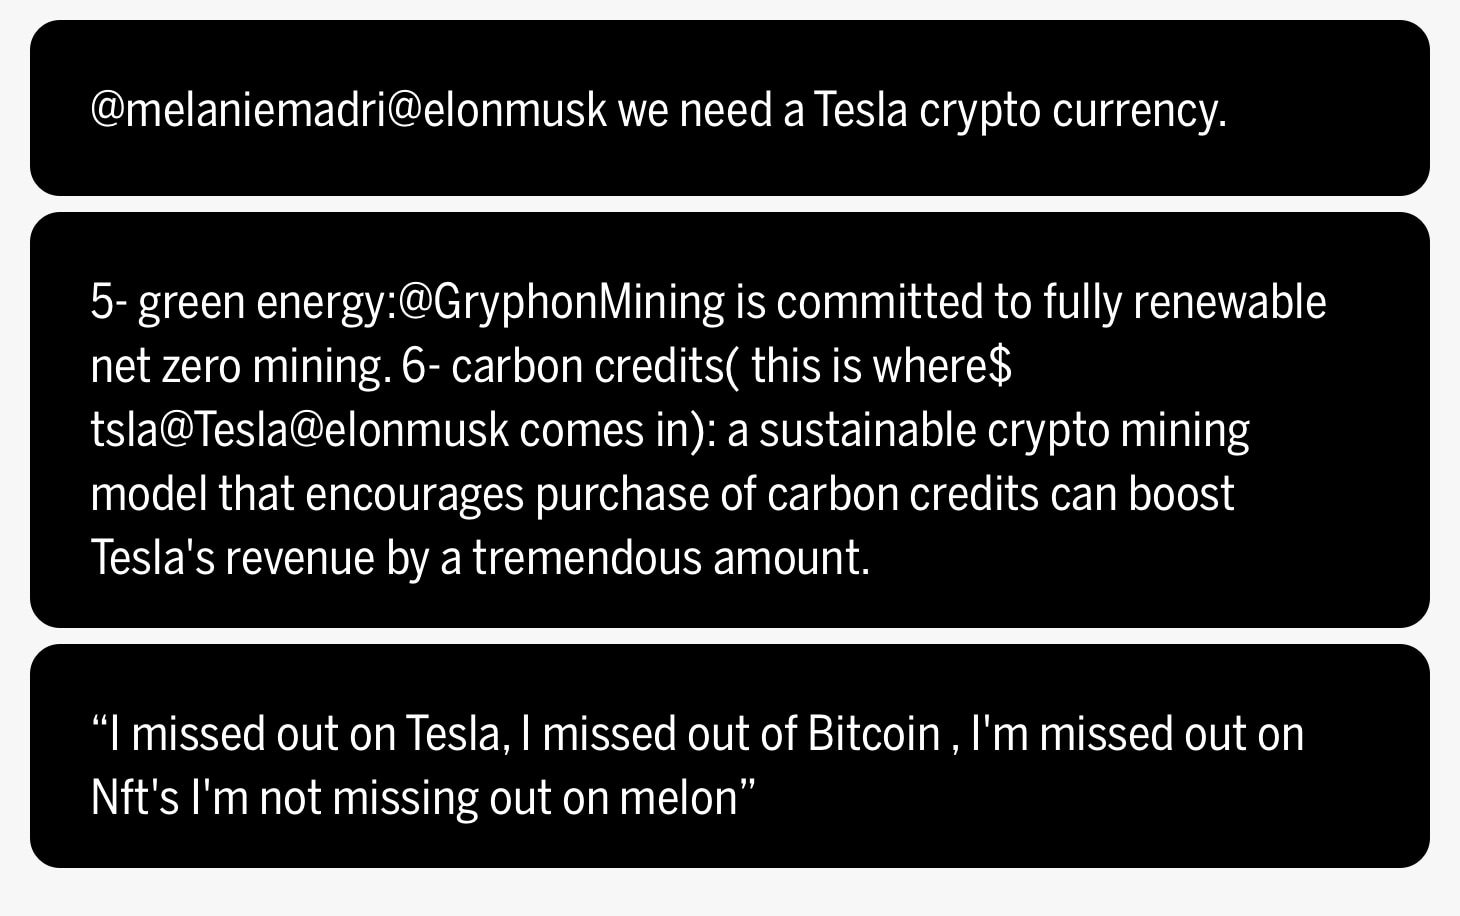 Tweets about Tesla and Bitcoin